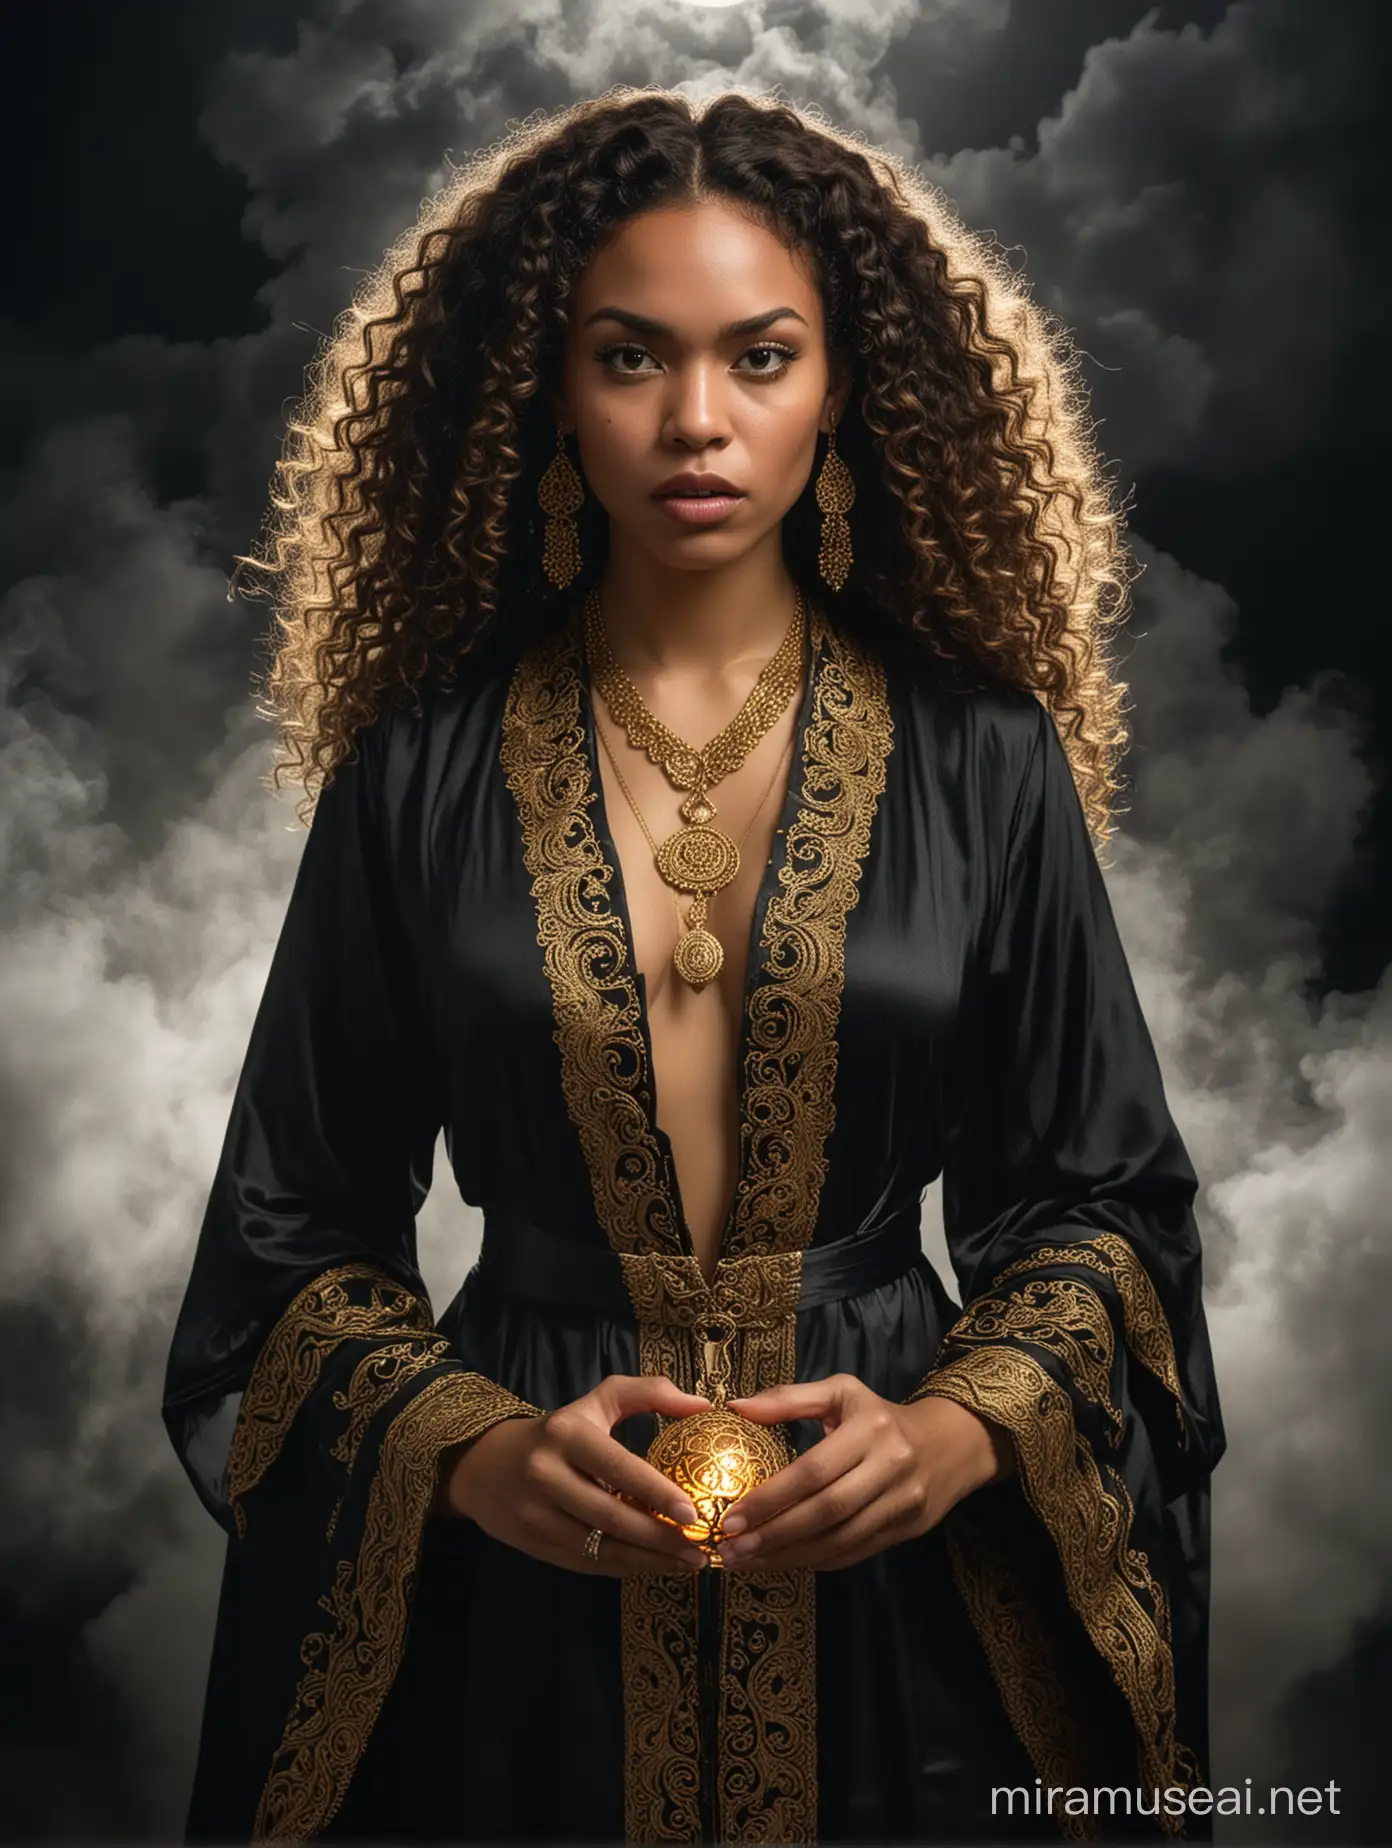 A angry light-skinned mixed race carribean woman wearing a dark robe with intricate golden embroidery and a golden necklace with a large pendant. She has an curly  hairstyle. She is holding a glowing dark  orb with black clouds in front of her with both hands. The background is dark with a hint of smoke-like fog. The woman's expression is one of concentration and power.